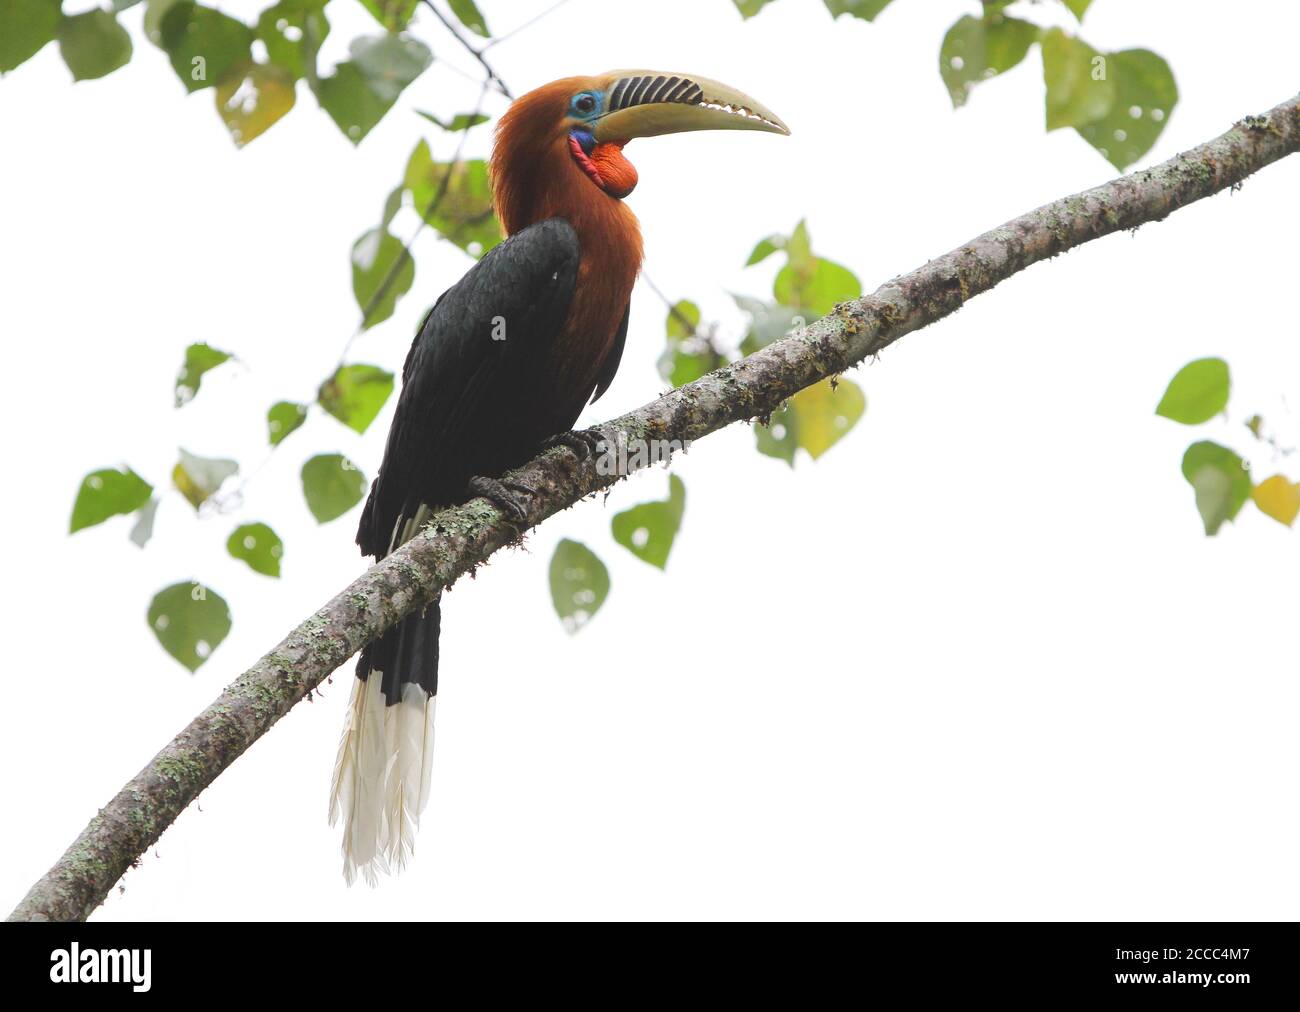 Rufous-necked Hornbill (Aceros nipalensis) in northeast India. Stock Photo